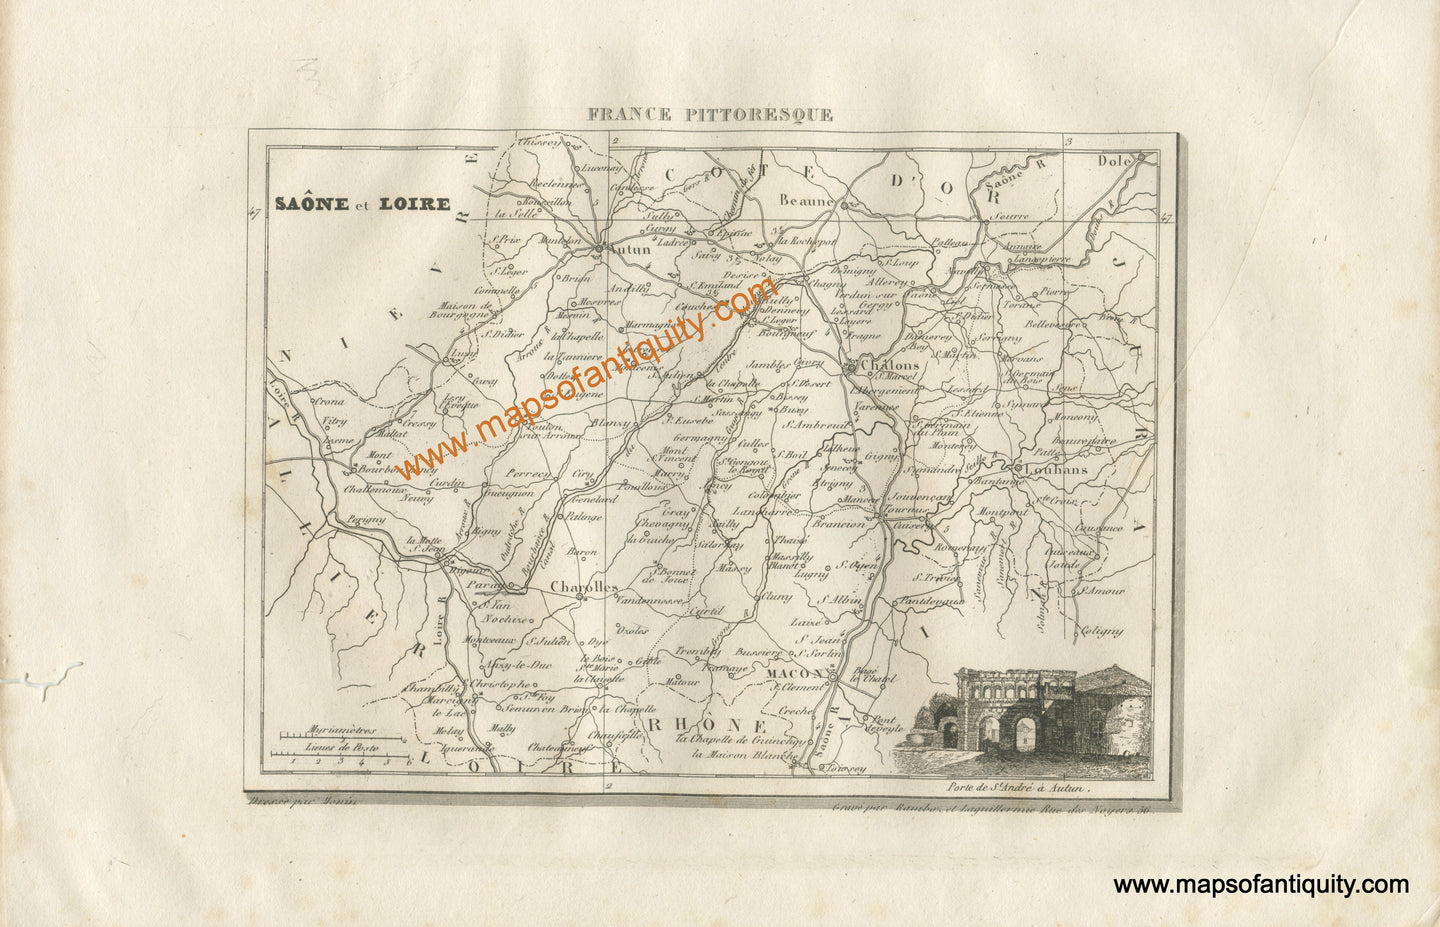 Antique-Black-and-White-Map-France-Saone-et-Loire-including-Autun-Chalons-Charolles-and-Macon-Europe-France-1835-Monin-Maps-Of-Antiquity